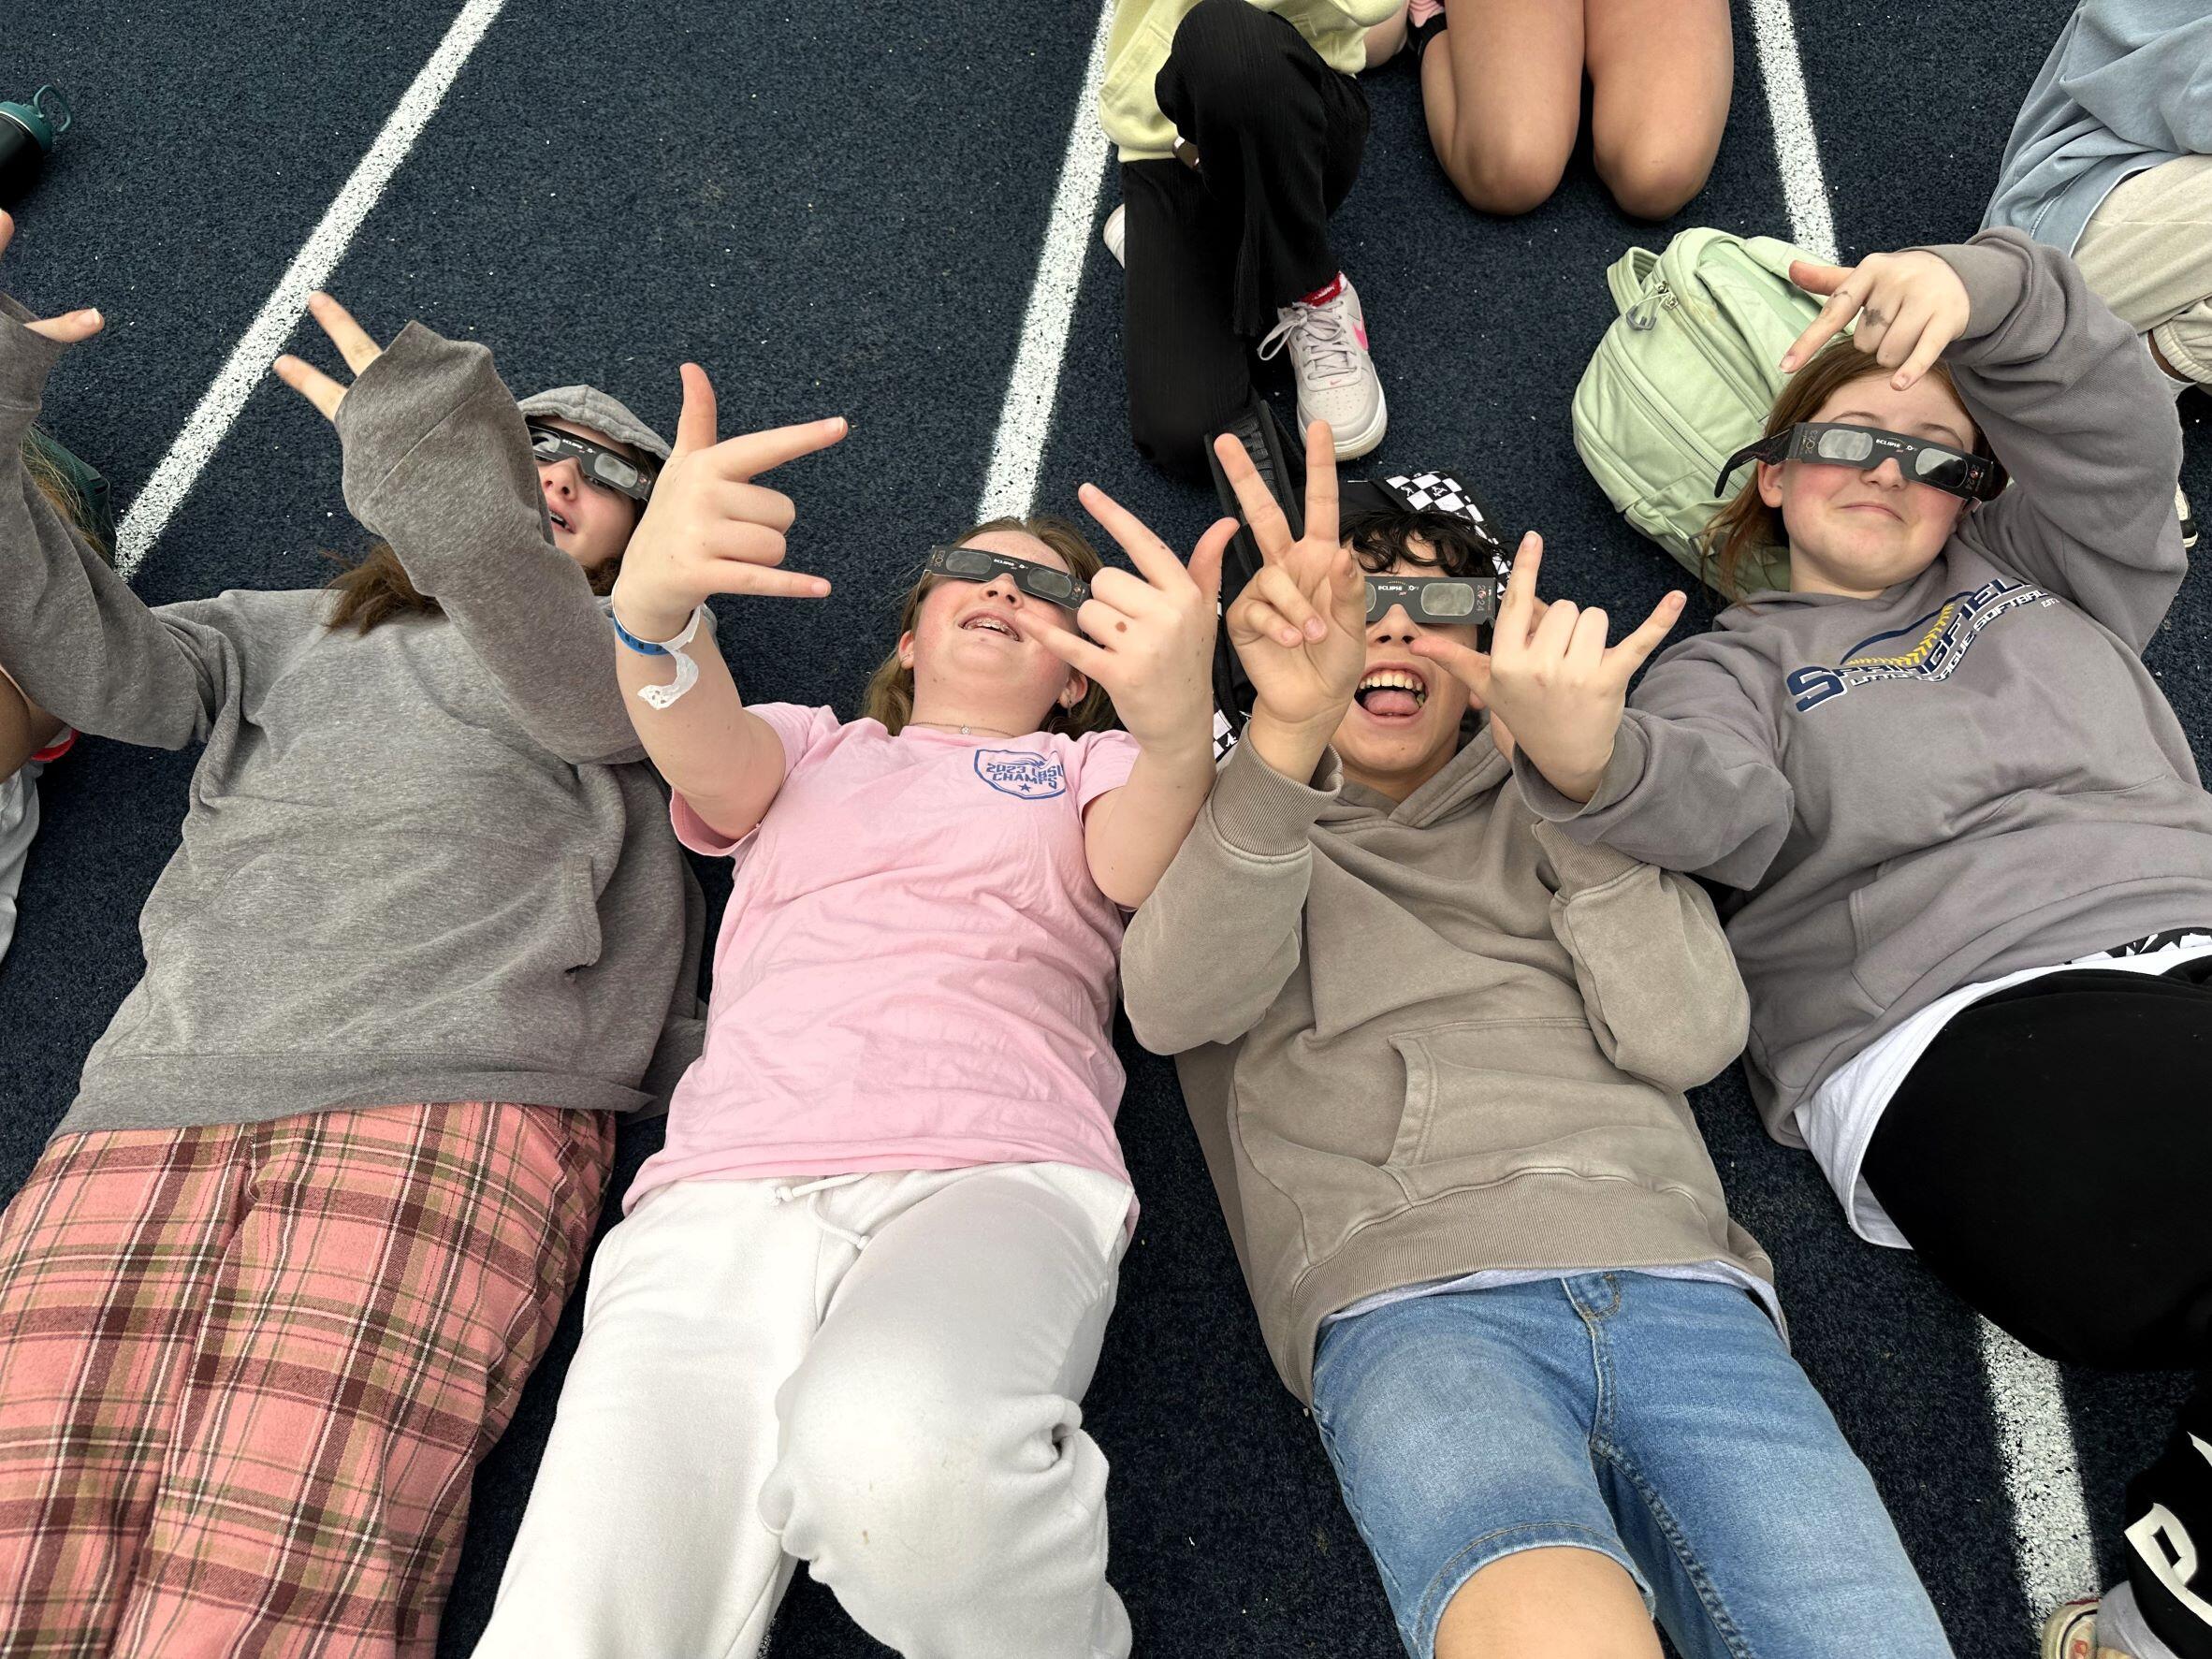 MS- 4 kids laying on the track, wearing eclipse glasses. All kids are smiling at the camera, holding up peace and I love you signs with their hands